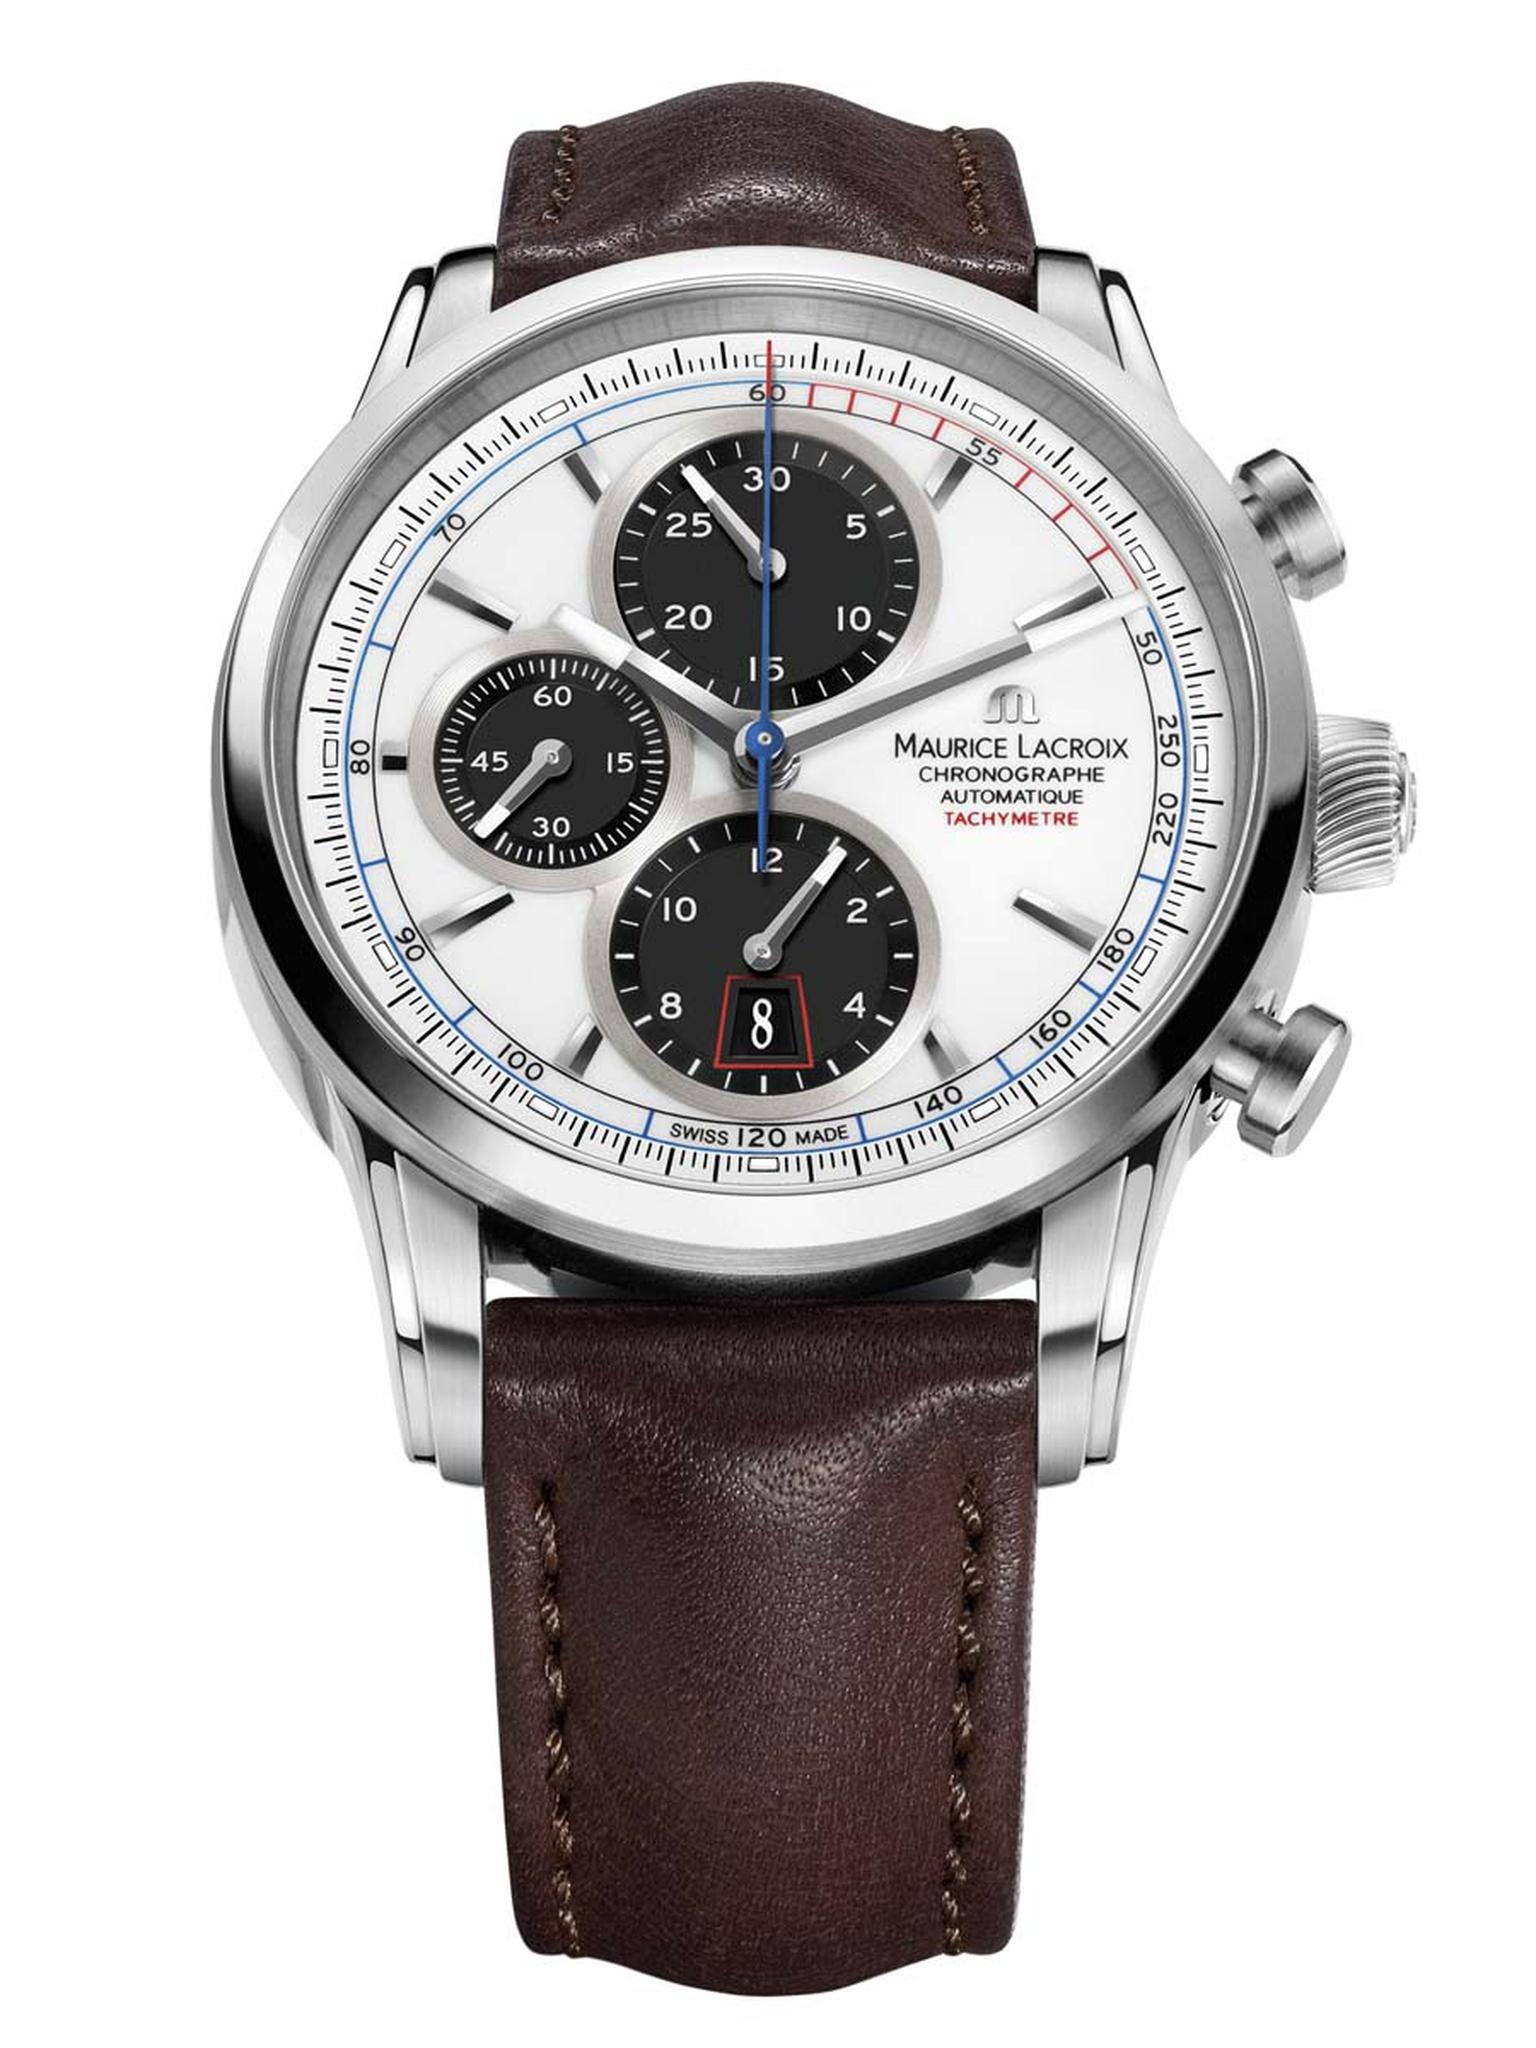 The trend for chronographs continues at Baselworld